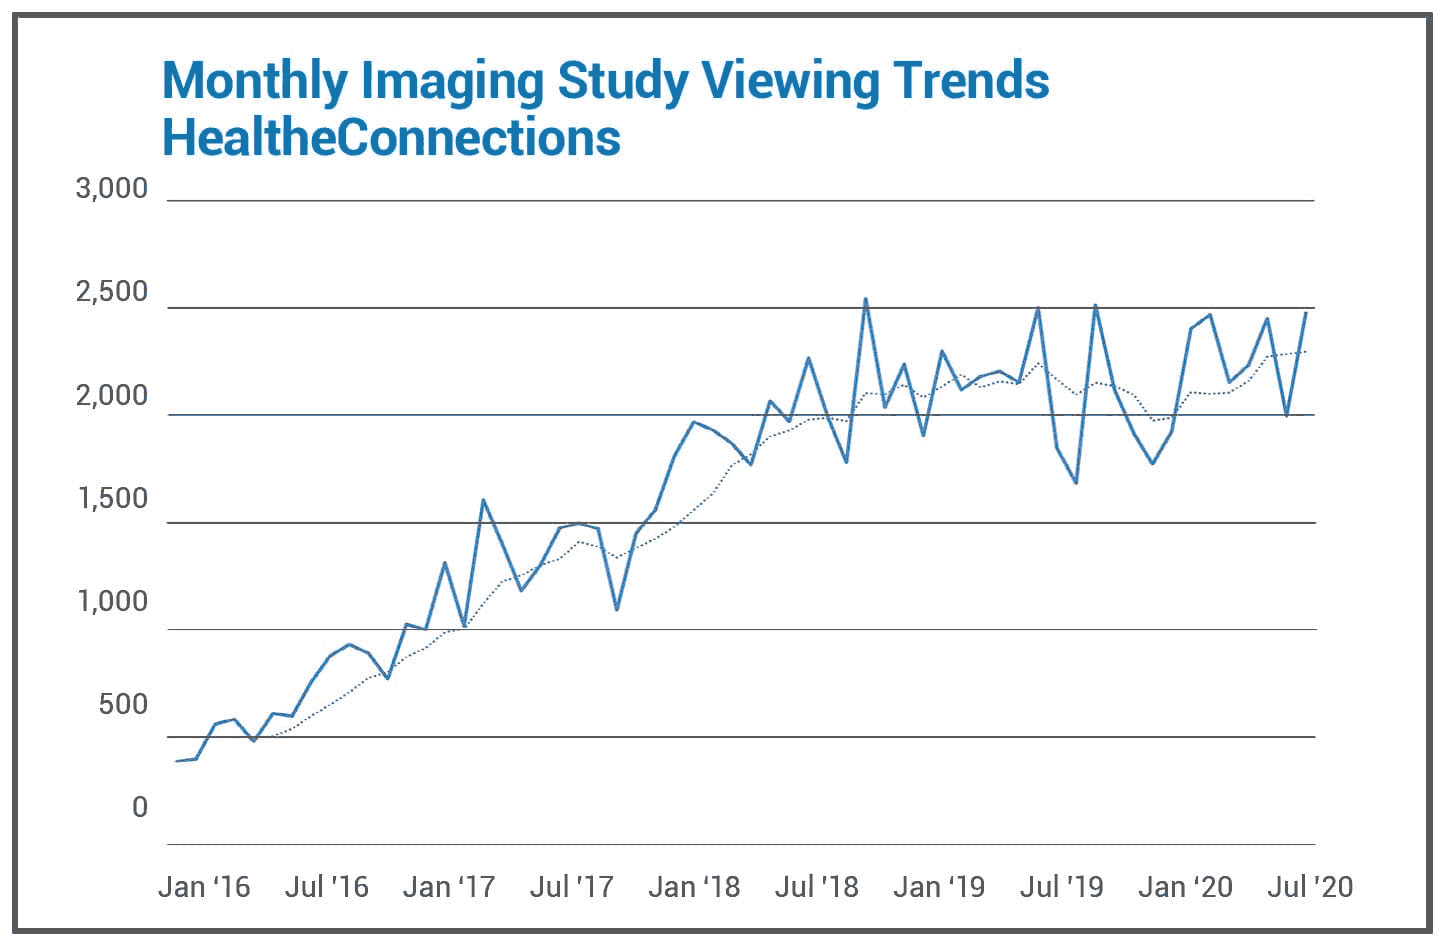 Monthly imaging study viewing trends HealtheConnections.